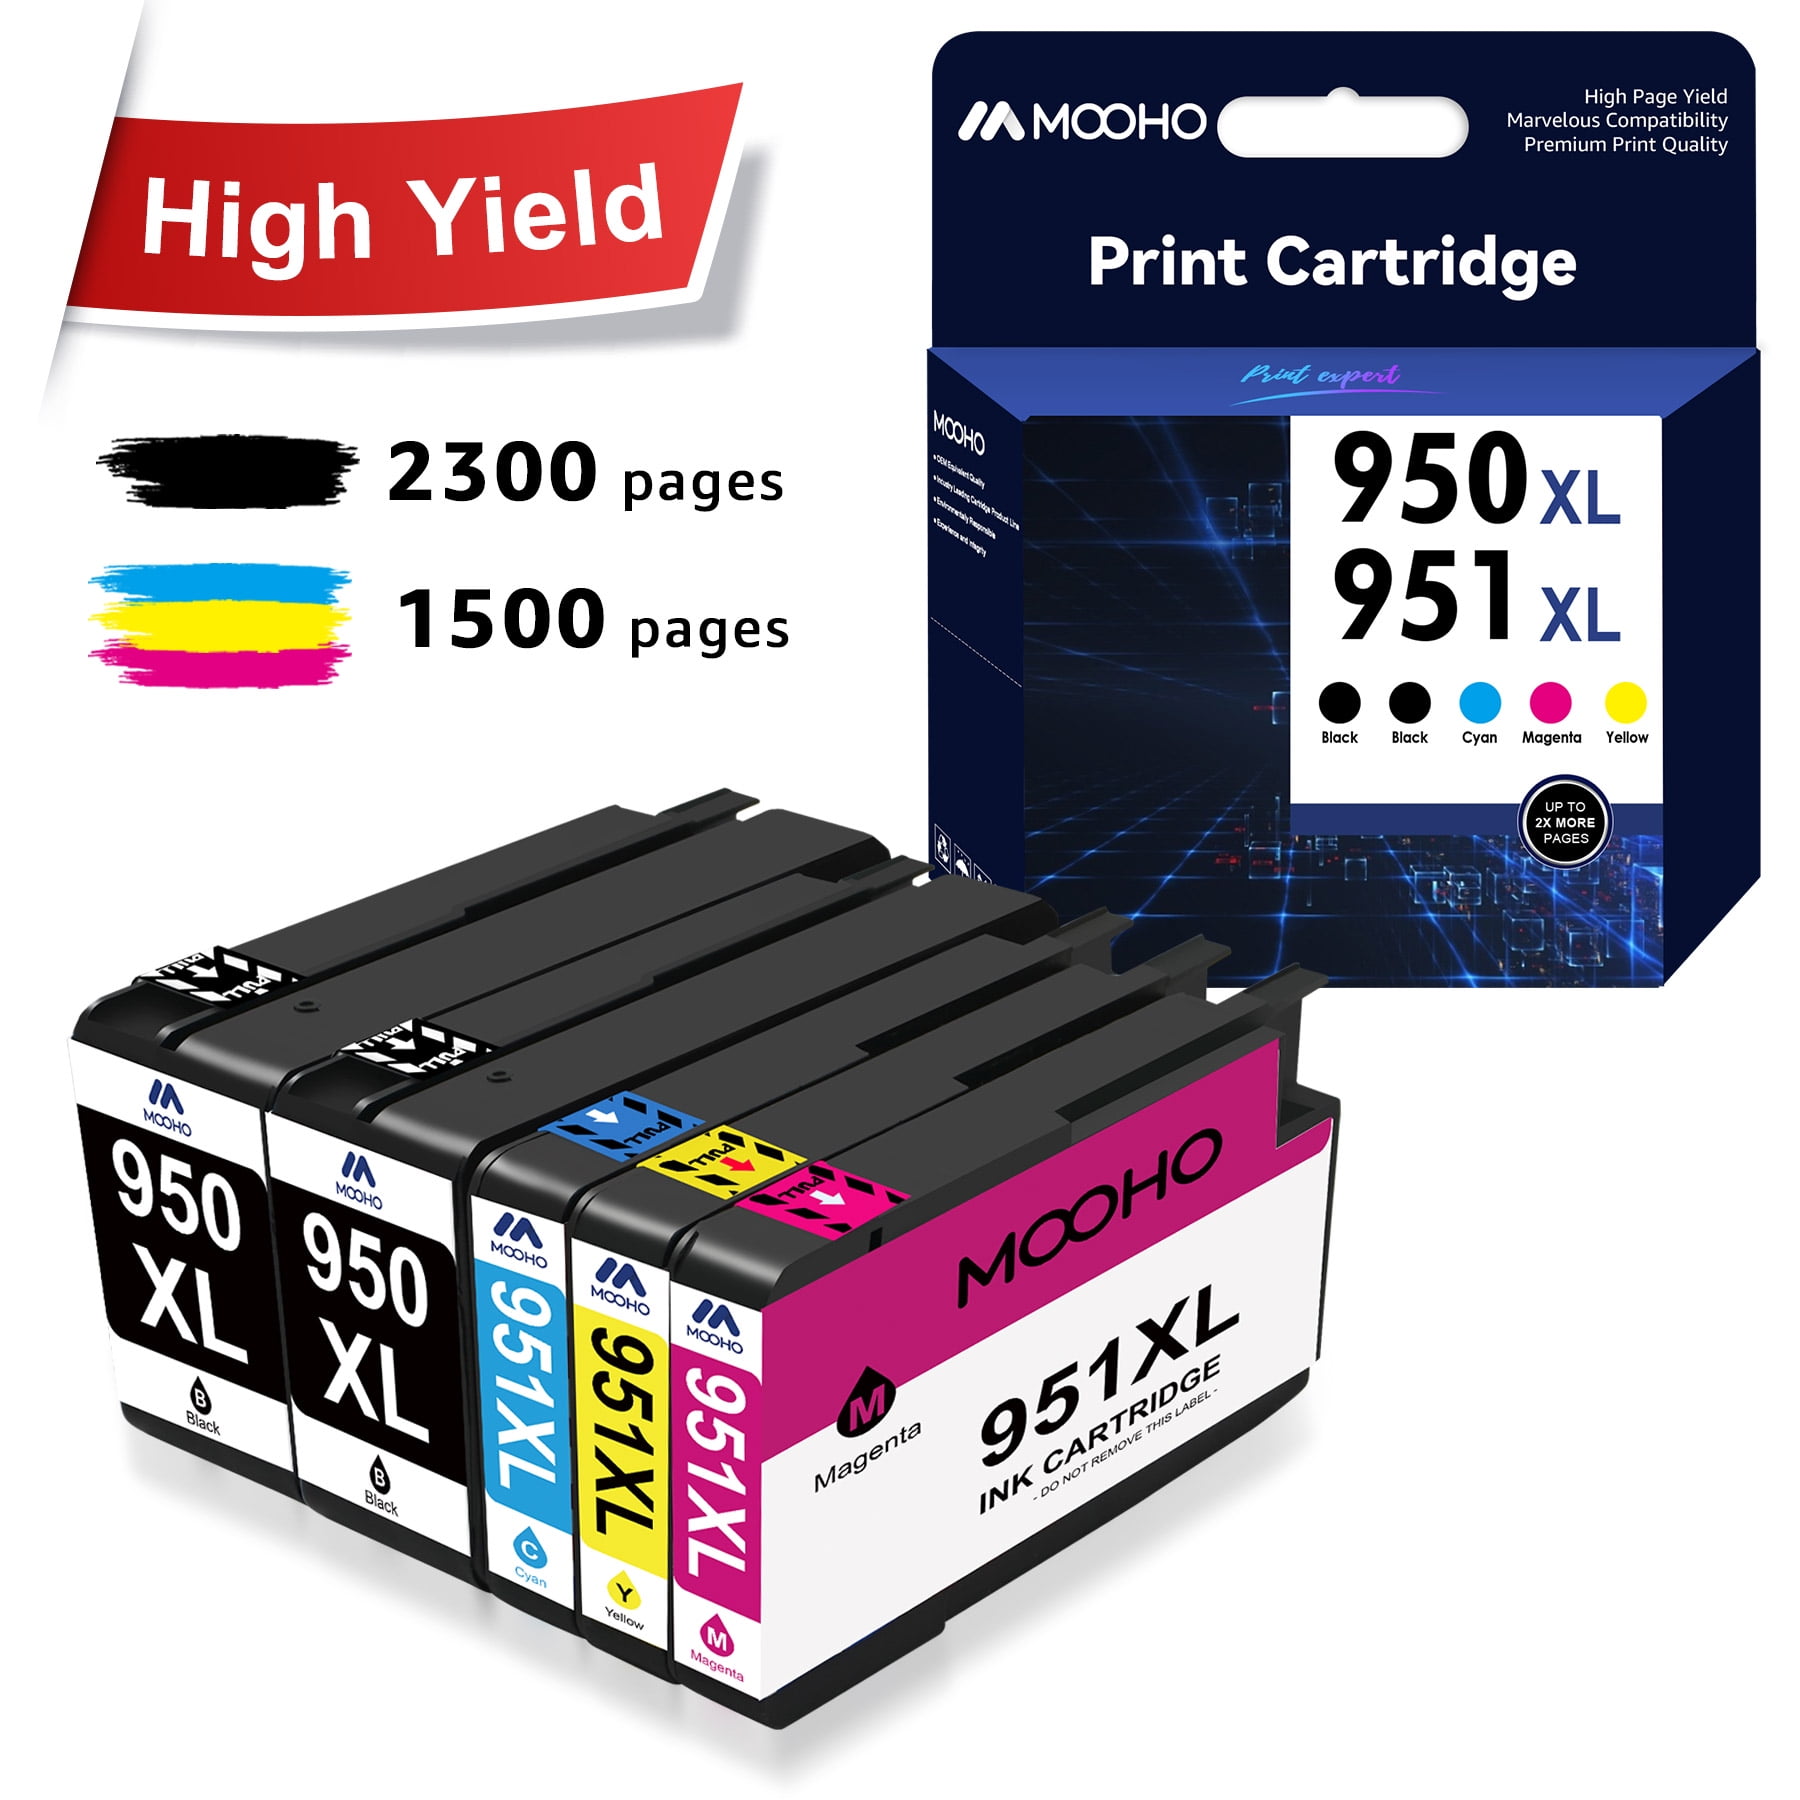 Mooho 950XL and 951 Combo Pack Replacement for HP Printer Ink 950 951 for OfficeJet  Pro 8610 8600 8620 8625 251dw 276dw Printer (Black Cyan Magenta Yellow,  4-Pack) 